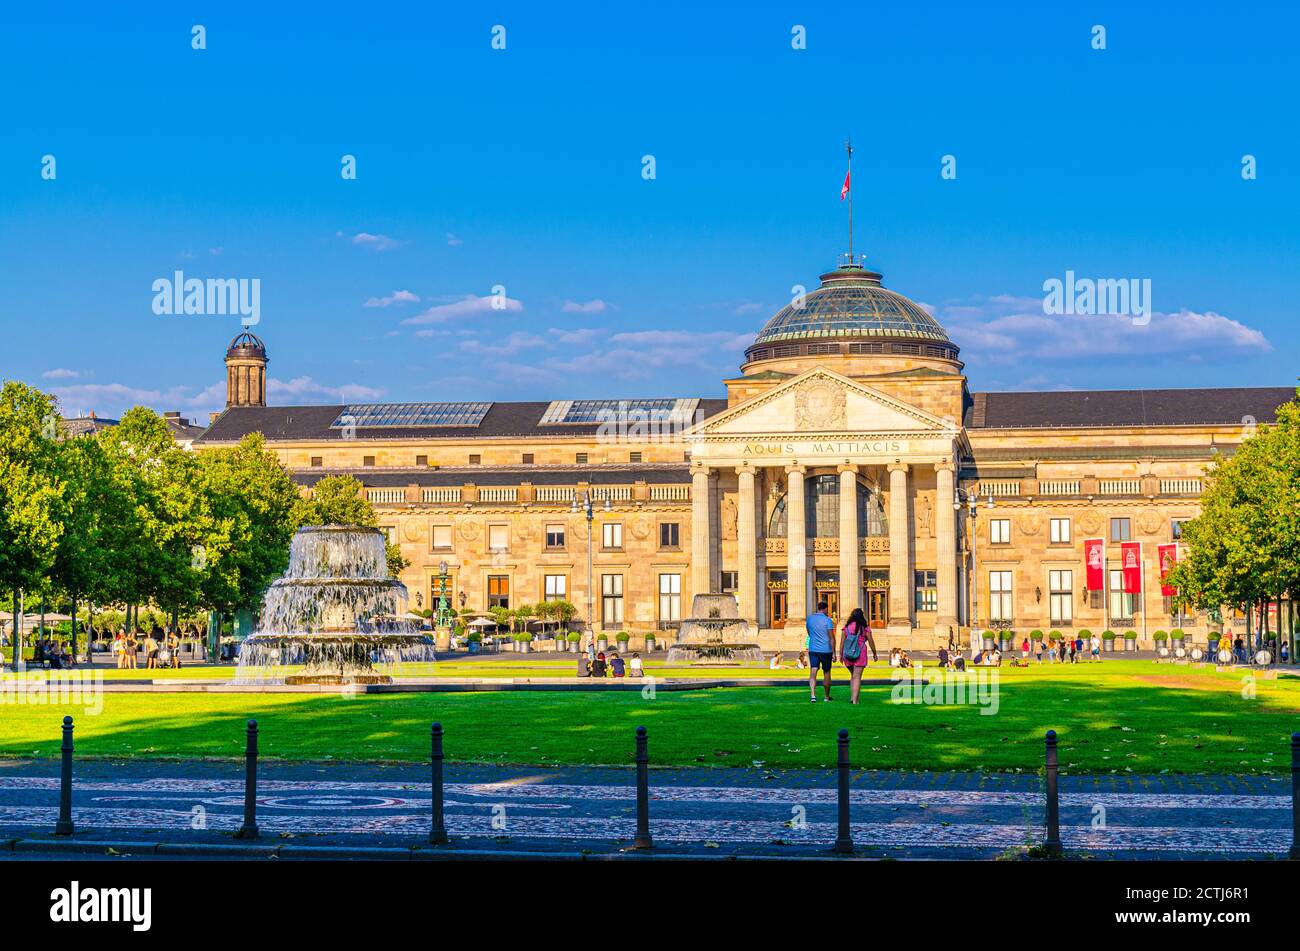 Wiesbaden, Germany, August 24, 2019: Kurhaus or cure house spa and casino building and Bowling Green park with grass lawn, trees alley and pond with fountain in historical city centre, State of Hesse Stock Photo